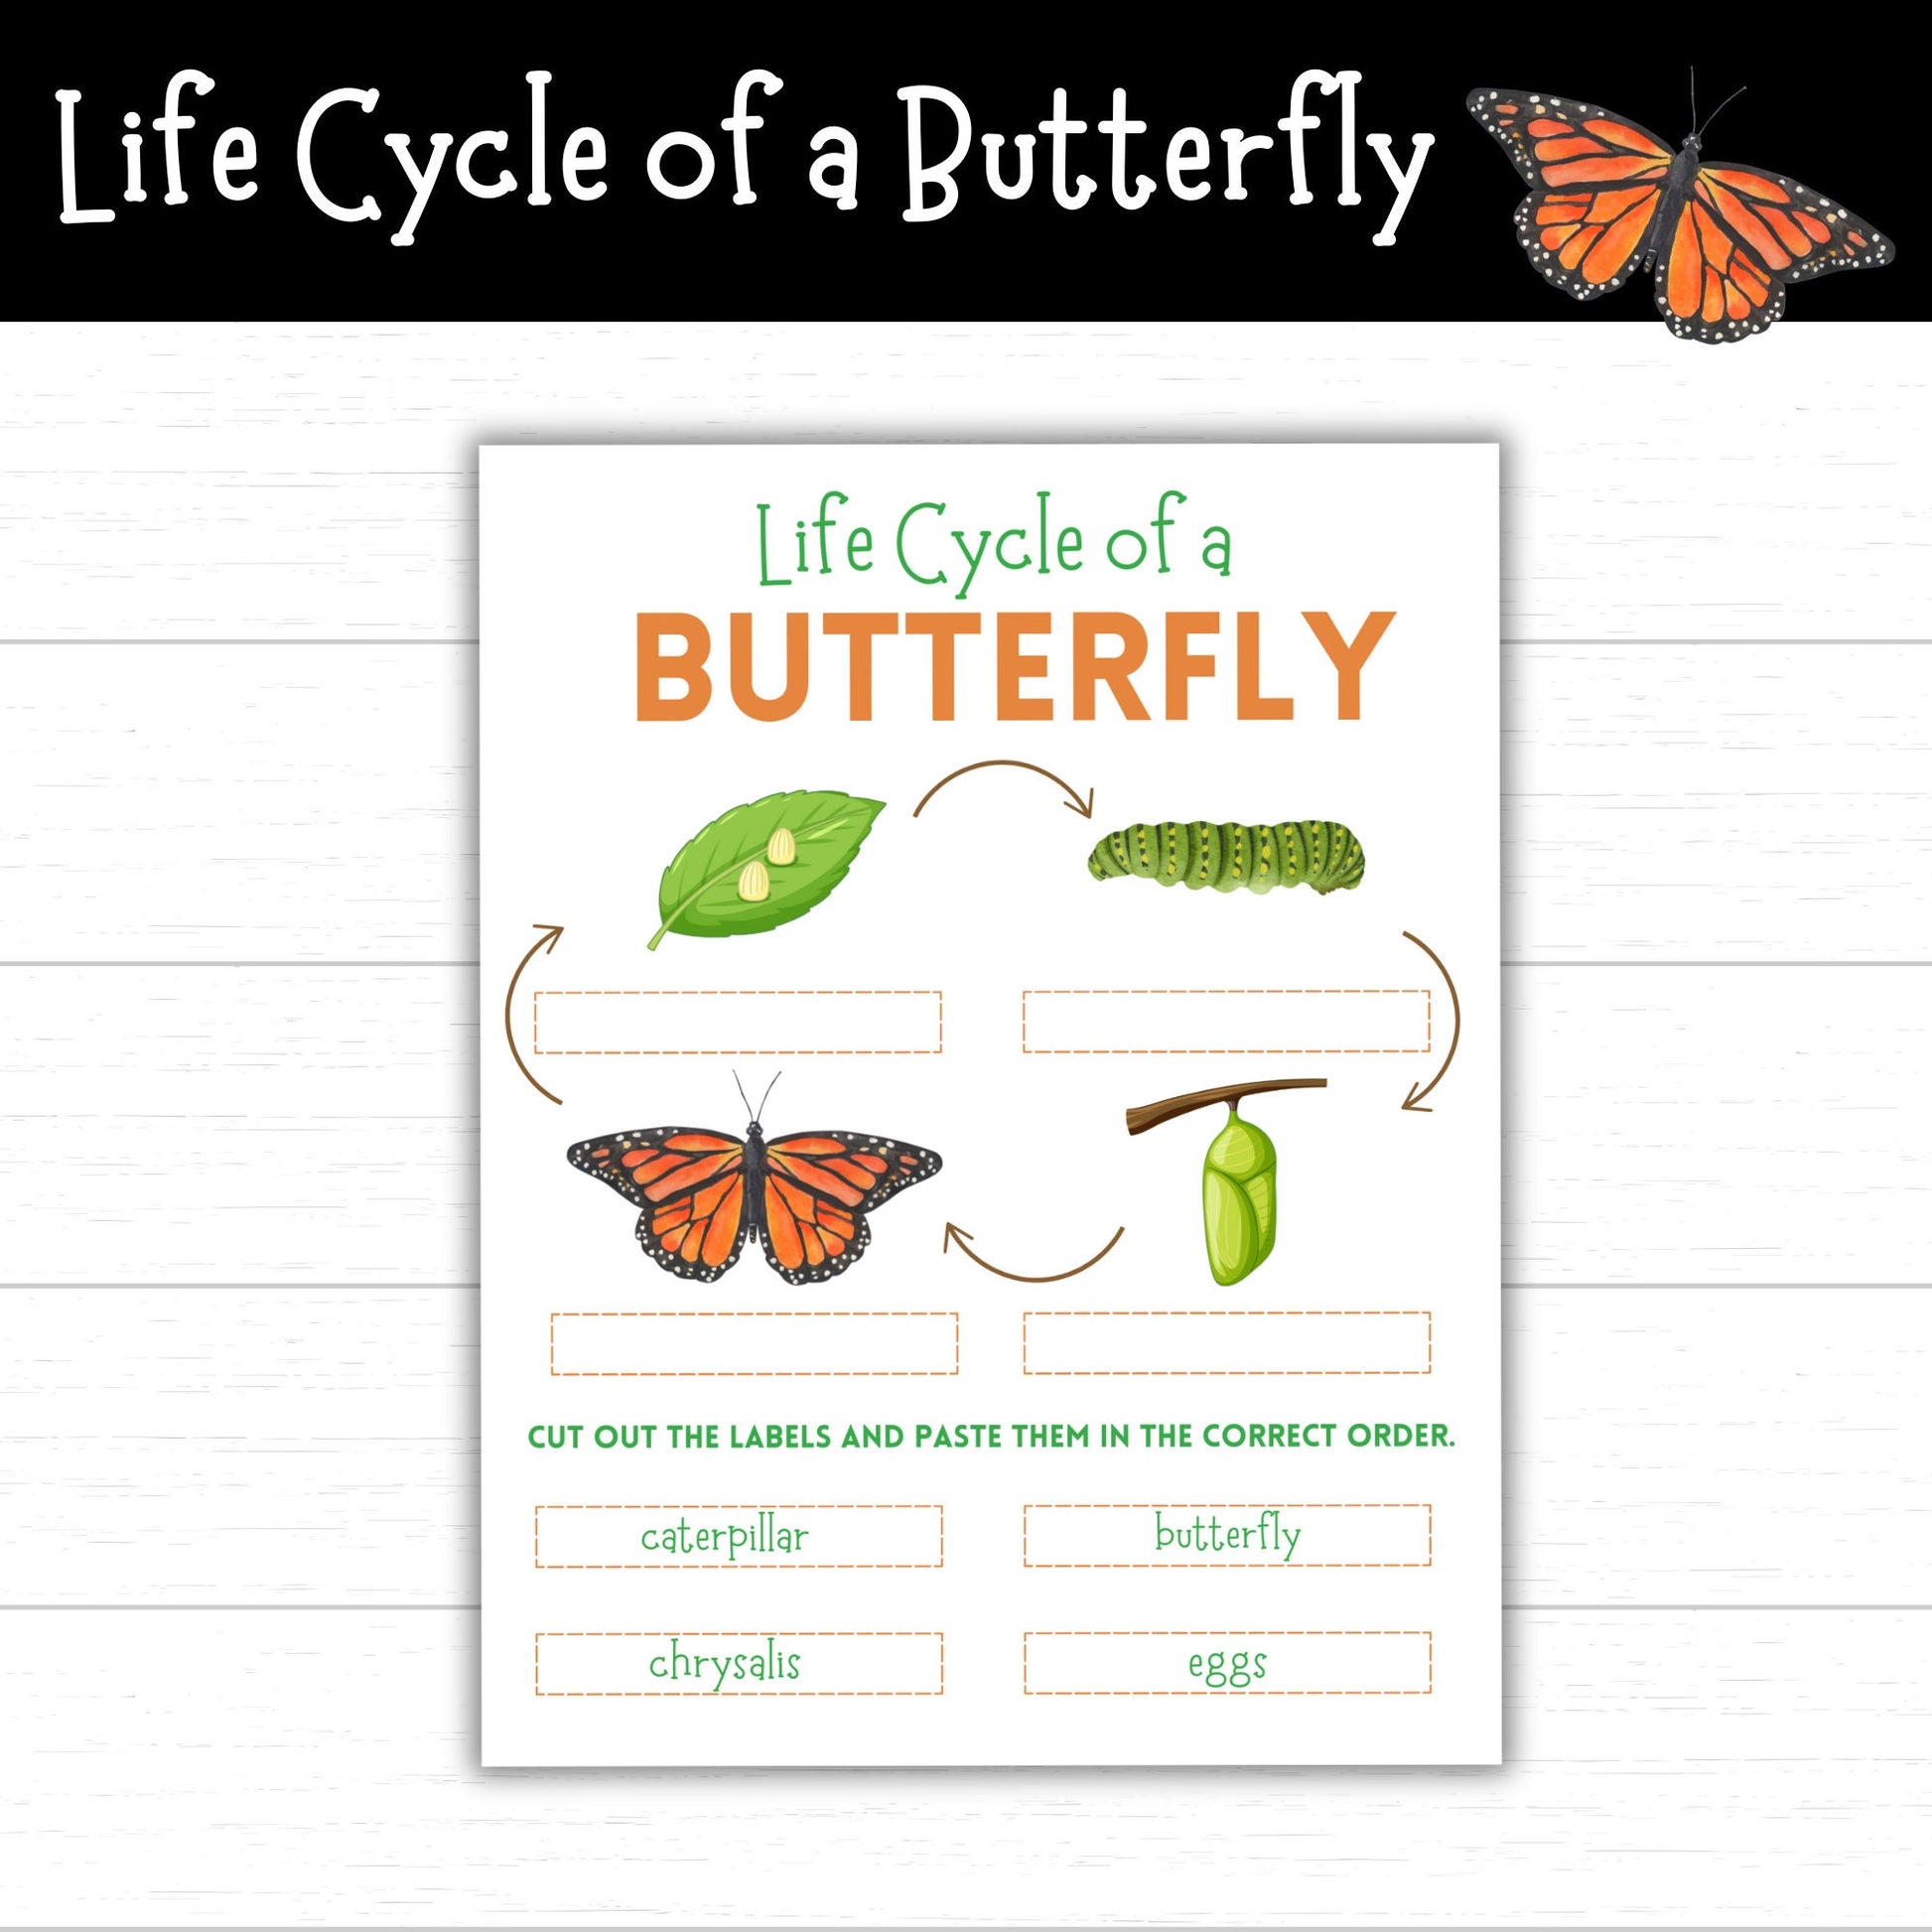 Life Cycle of a Butterfly, Printable Butterfly Life Cycle, Life Cycle Worksheets, Printable Life Cycles, Life Cycle of an Insect